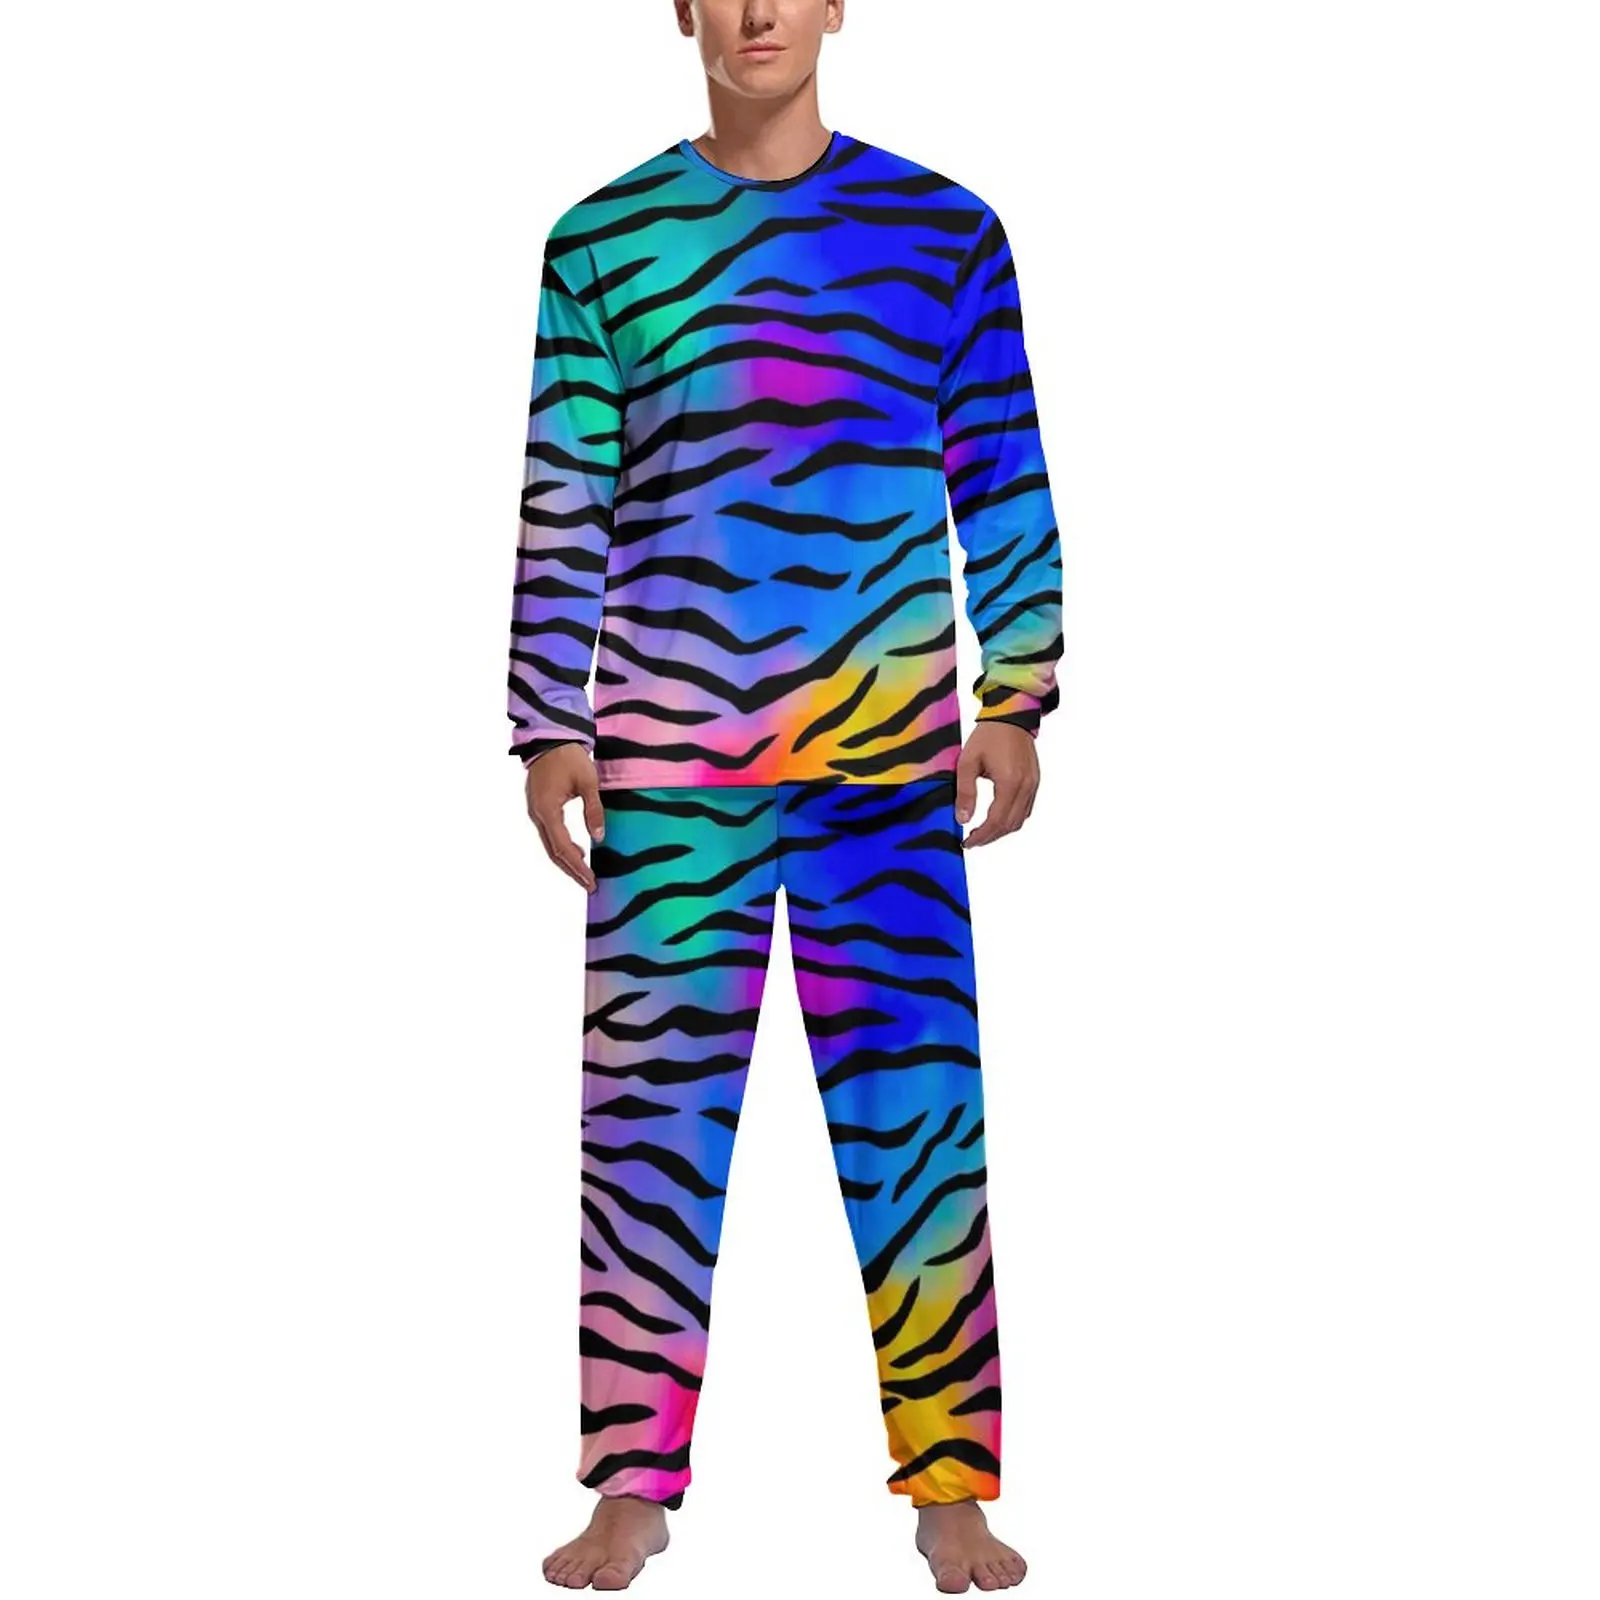 Tiger Stripes Pajamas Autumn Abstract Line Print Casual Home Suit Men 2 Pieces Pattern Long Sleeve Lovely Pajama Sets